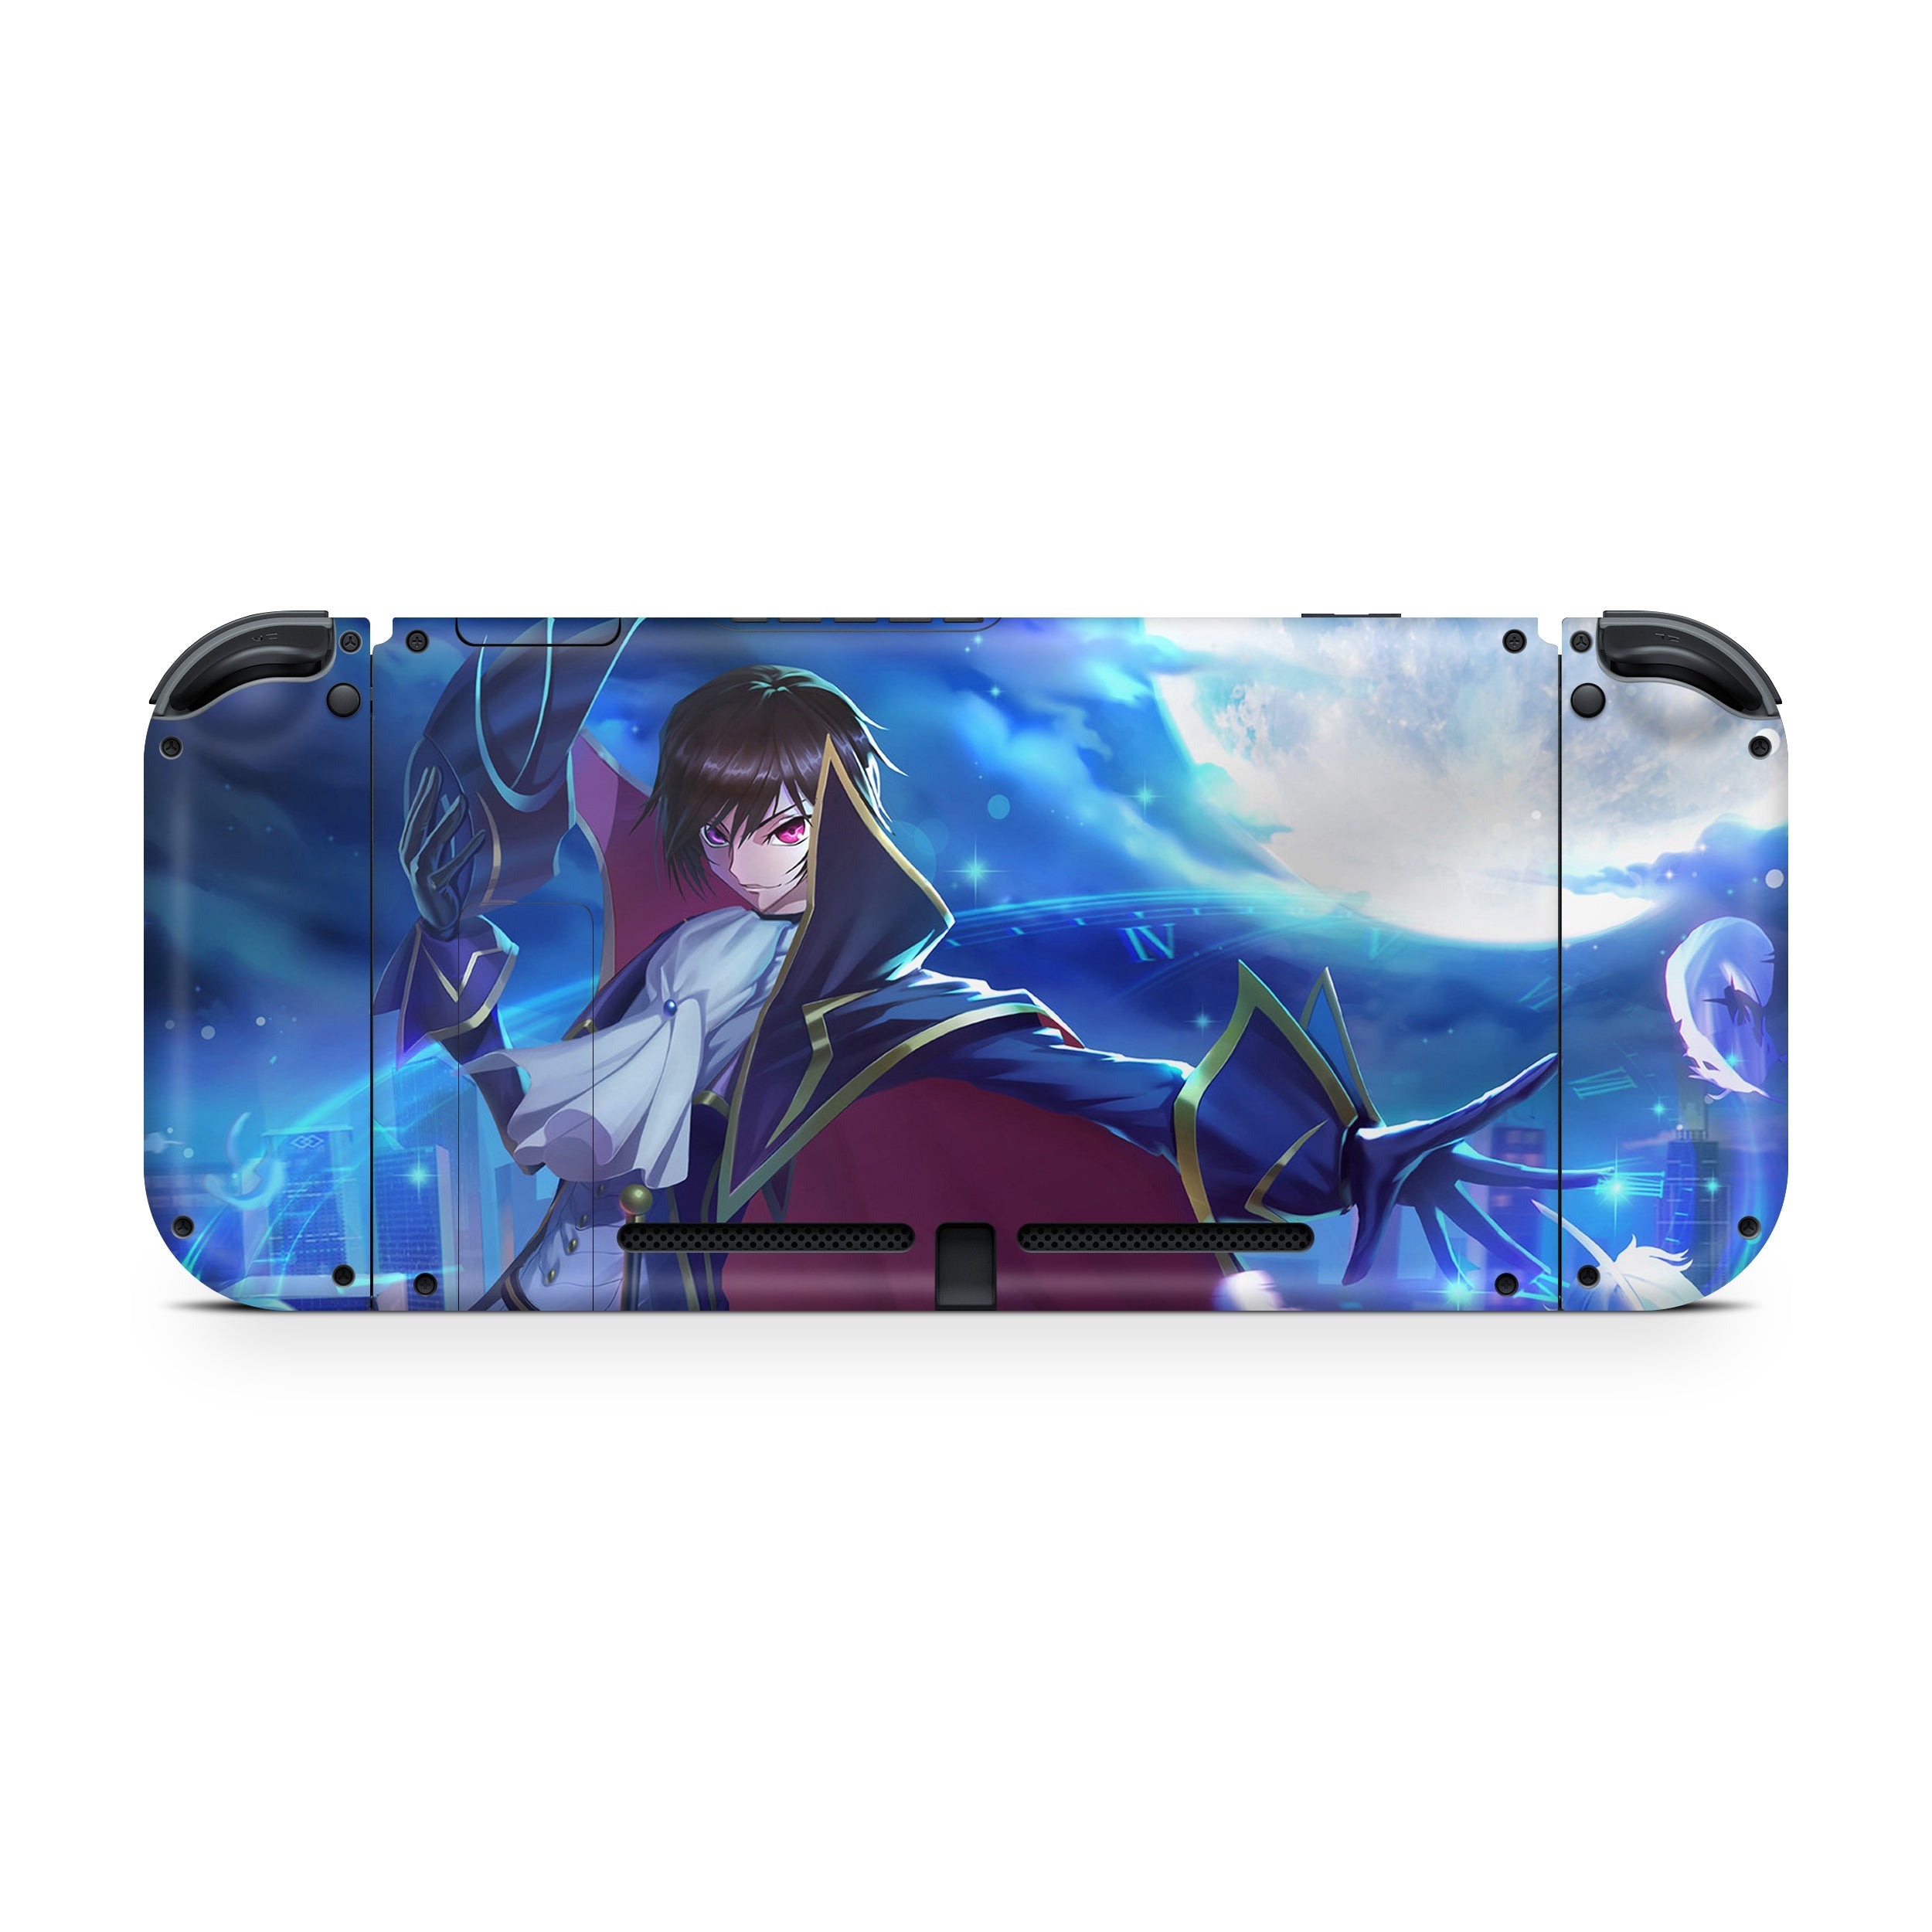 A video game skin featuring a Code Geass Lelouch Lamperoug design for the Nintendo Switch.